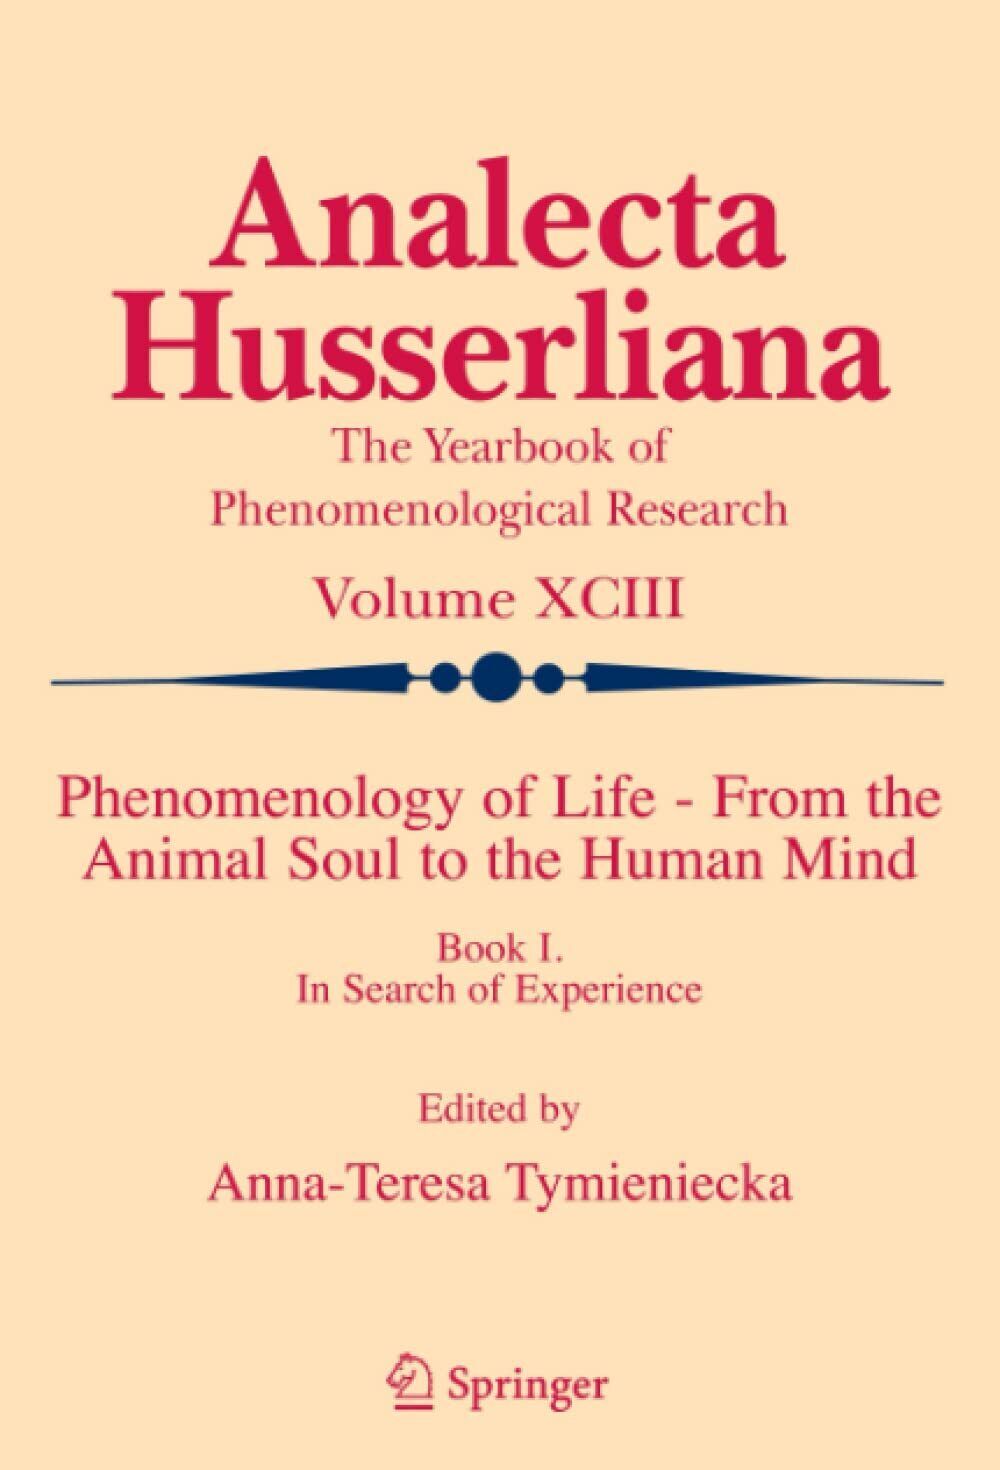 Phenomenology of Life - From the Animal Soul to the Human Mind - Springer, 2010